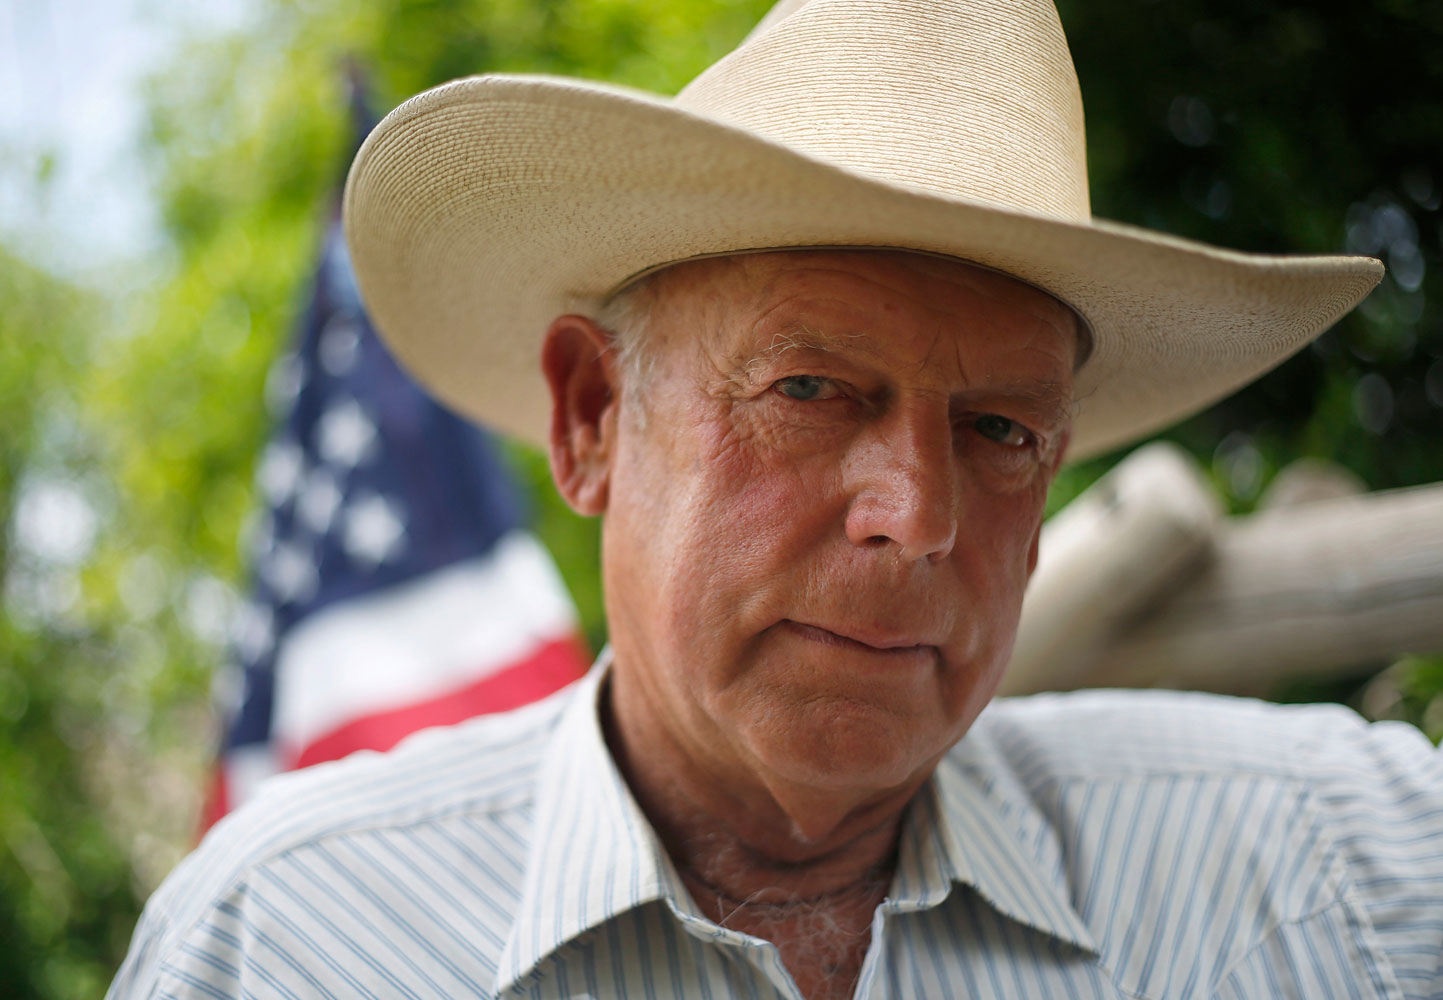 Rancher Cliven Bundy poses at his home in Bunkerville, Nevada, April 11, 2014. (Jim Urquhart—Reuters)